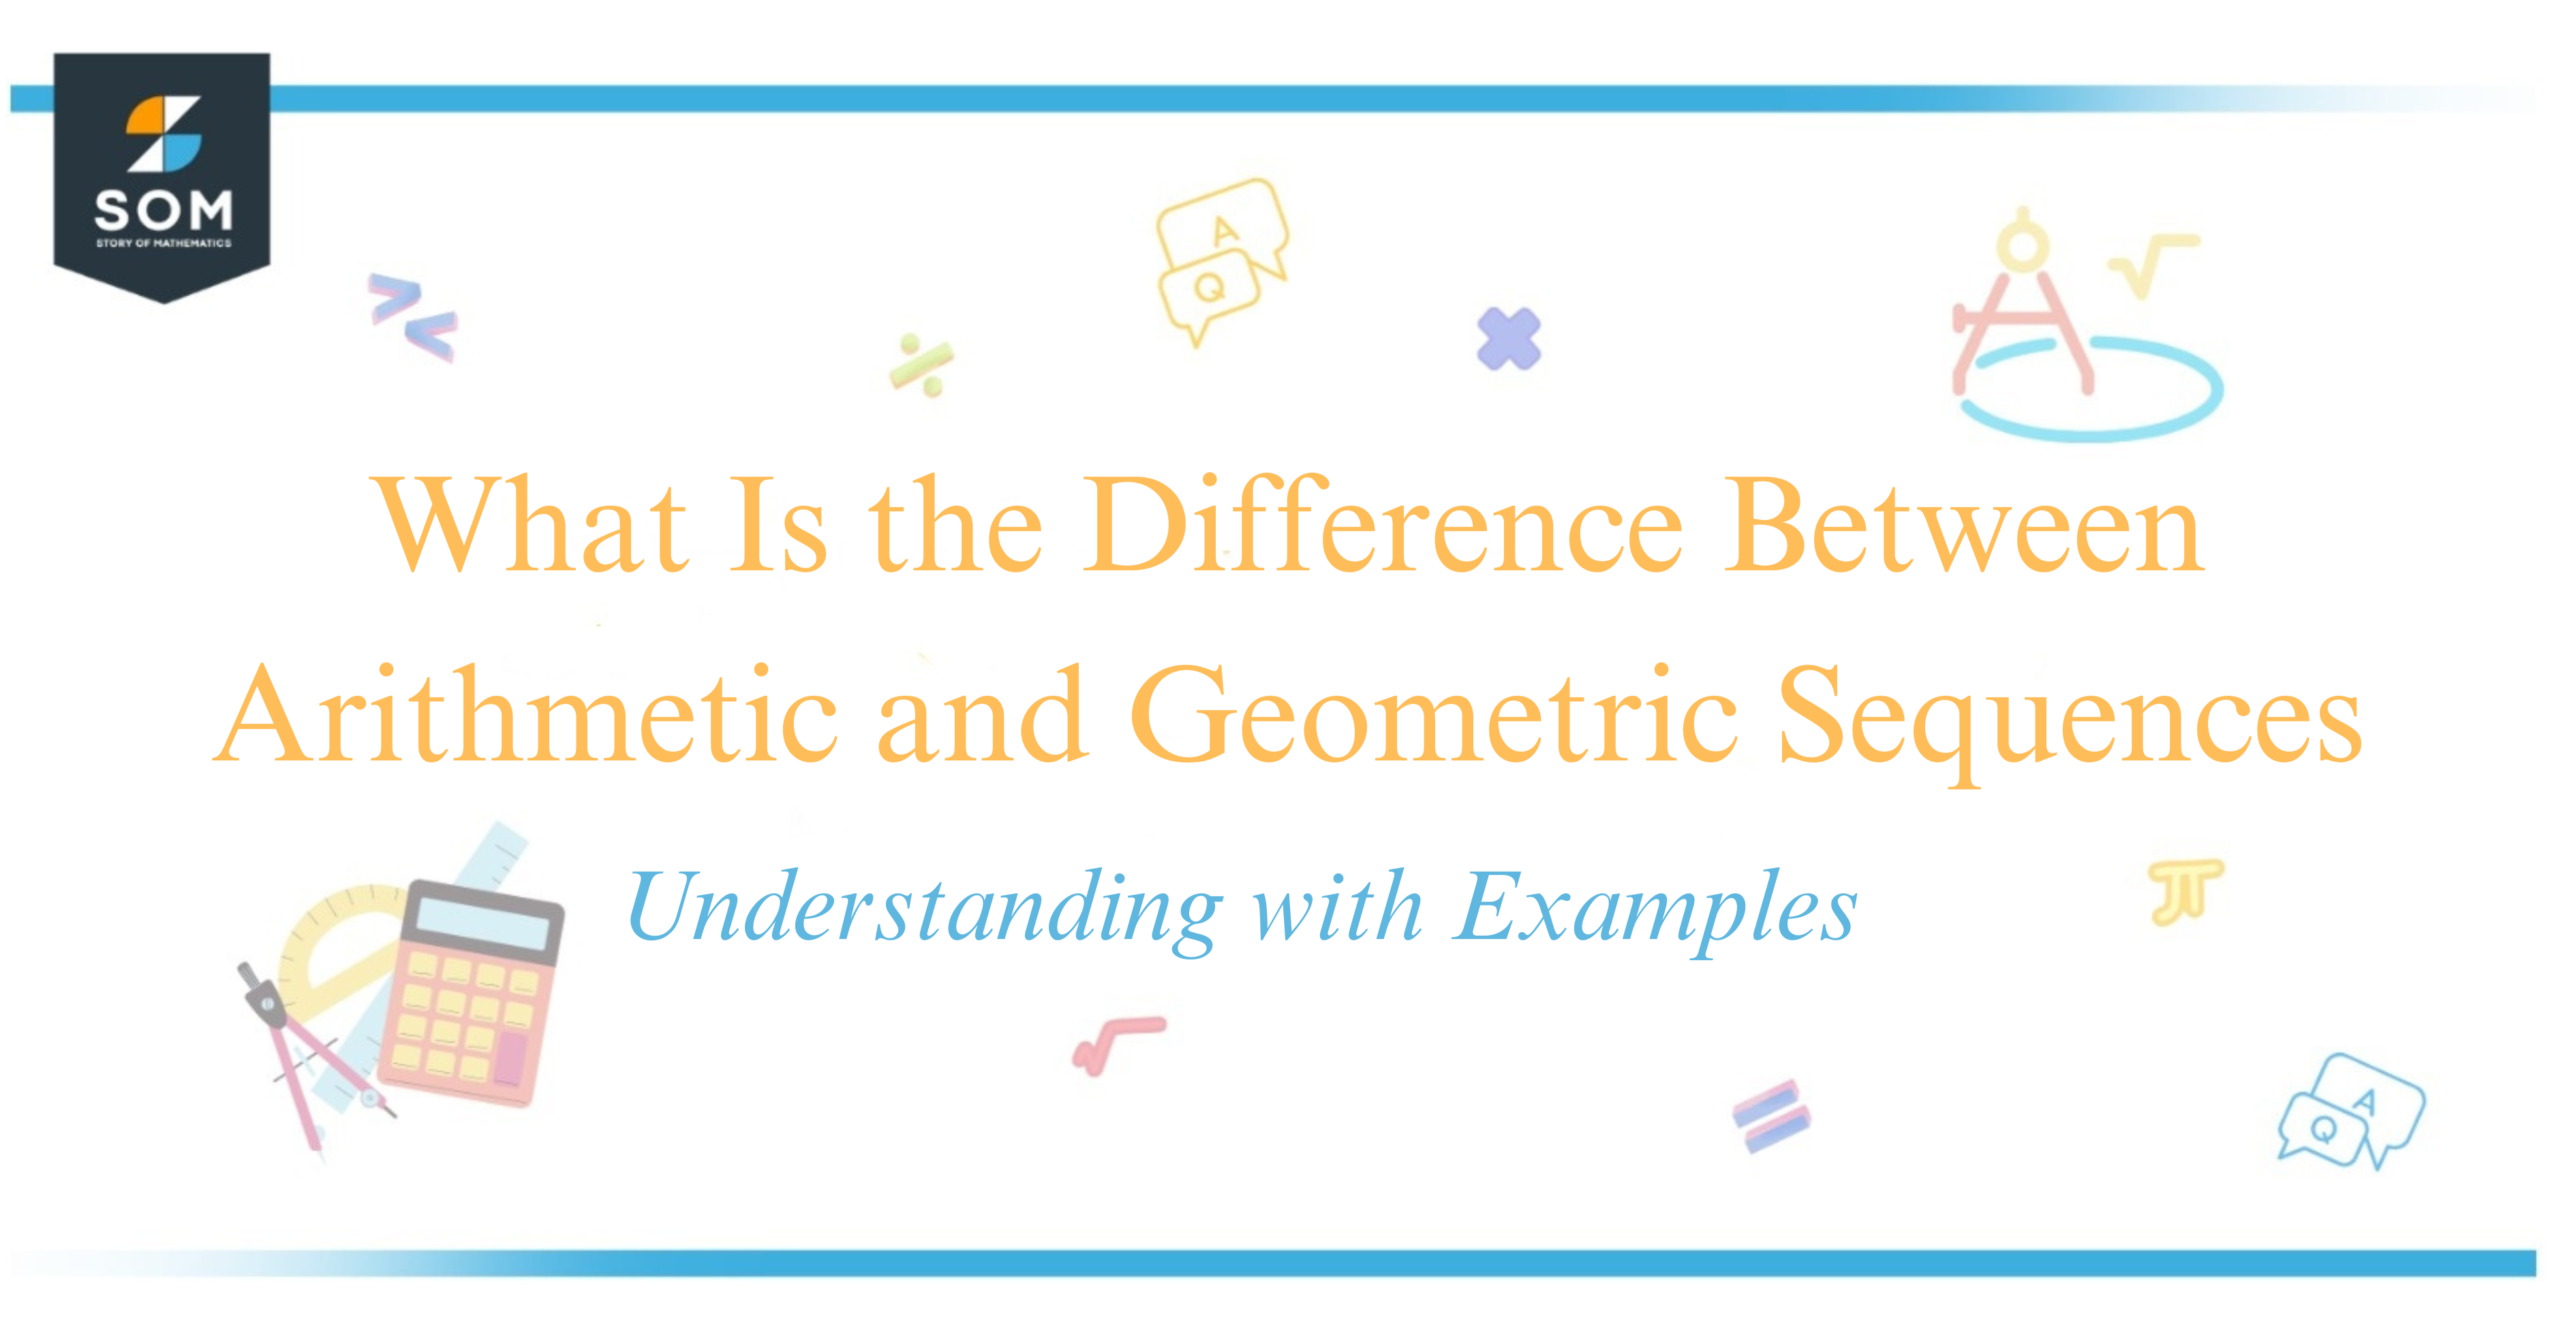 What Is the Difference Between Arithmetic and Geometric Sequences Understanding with Examples